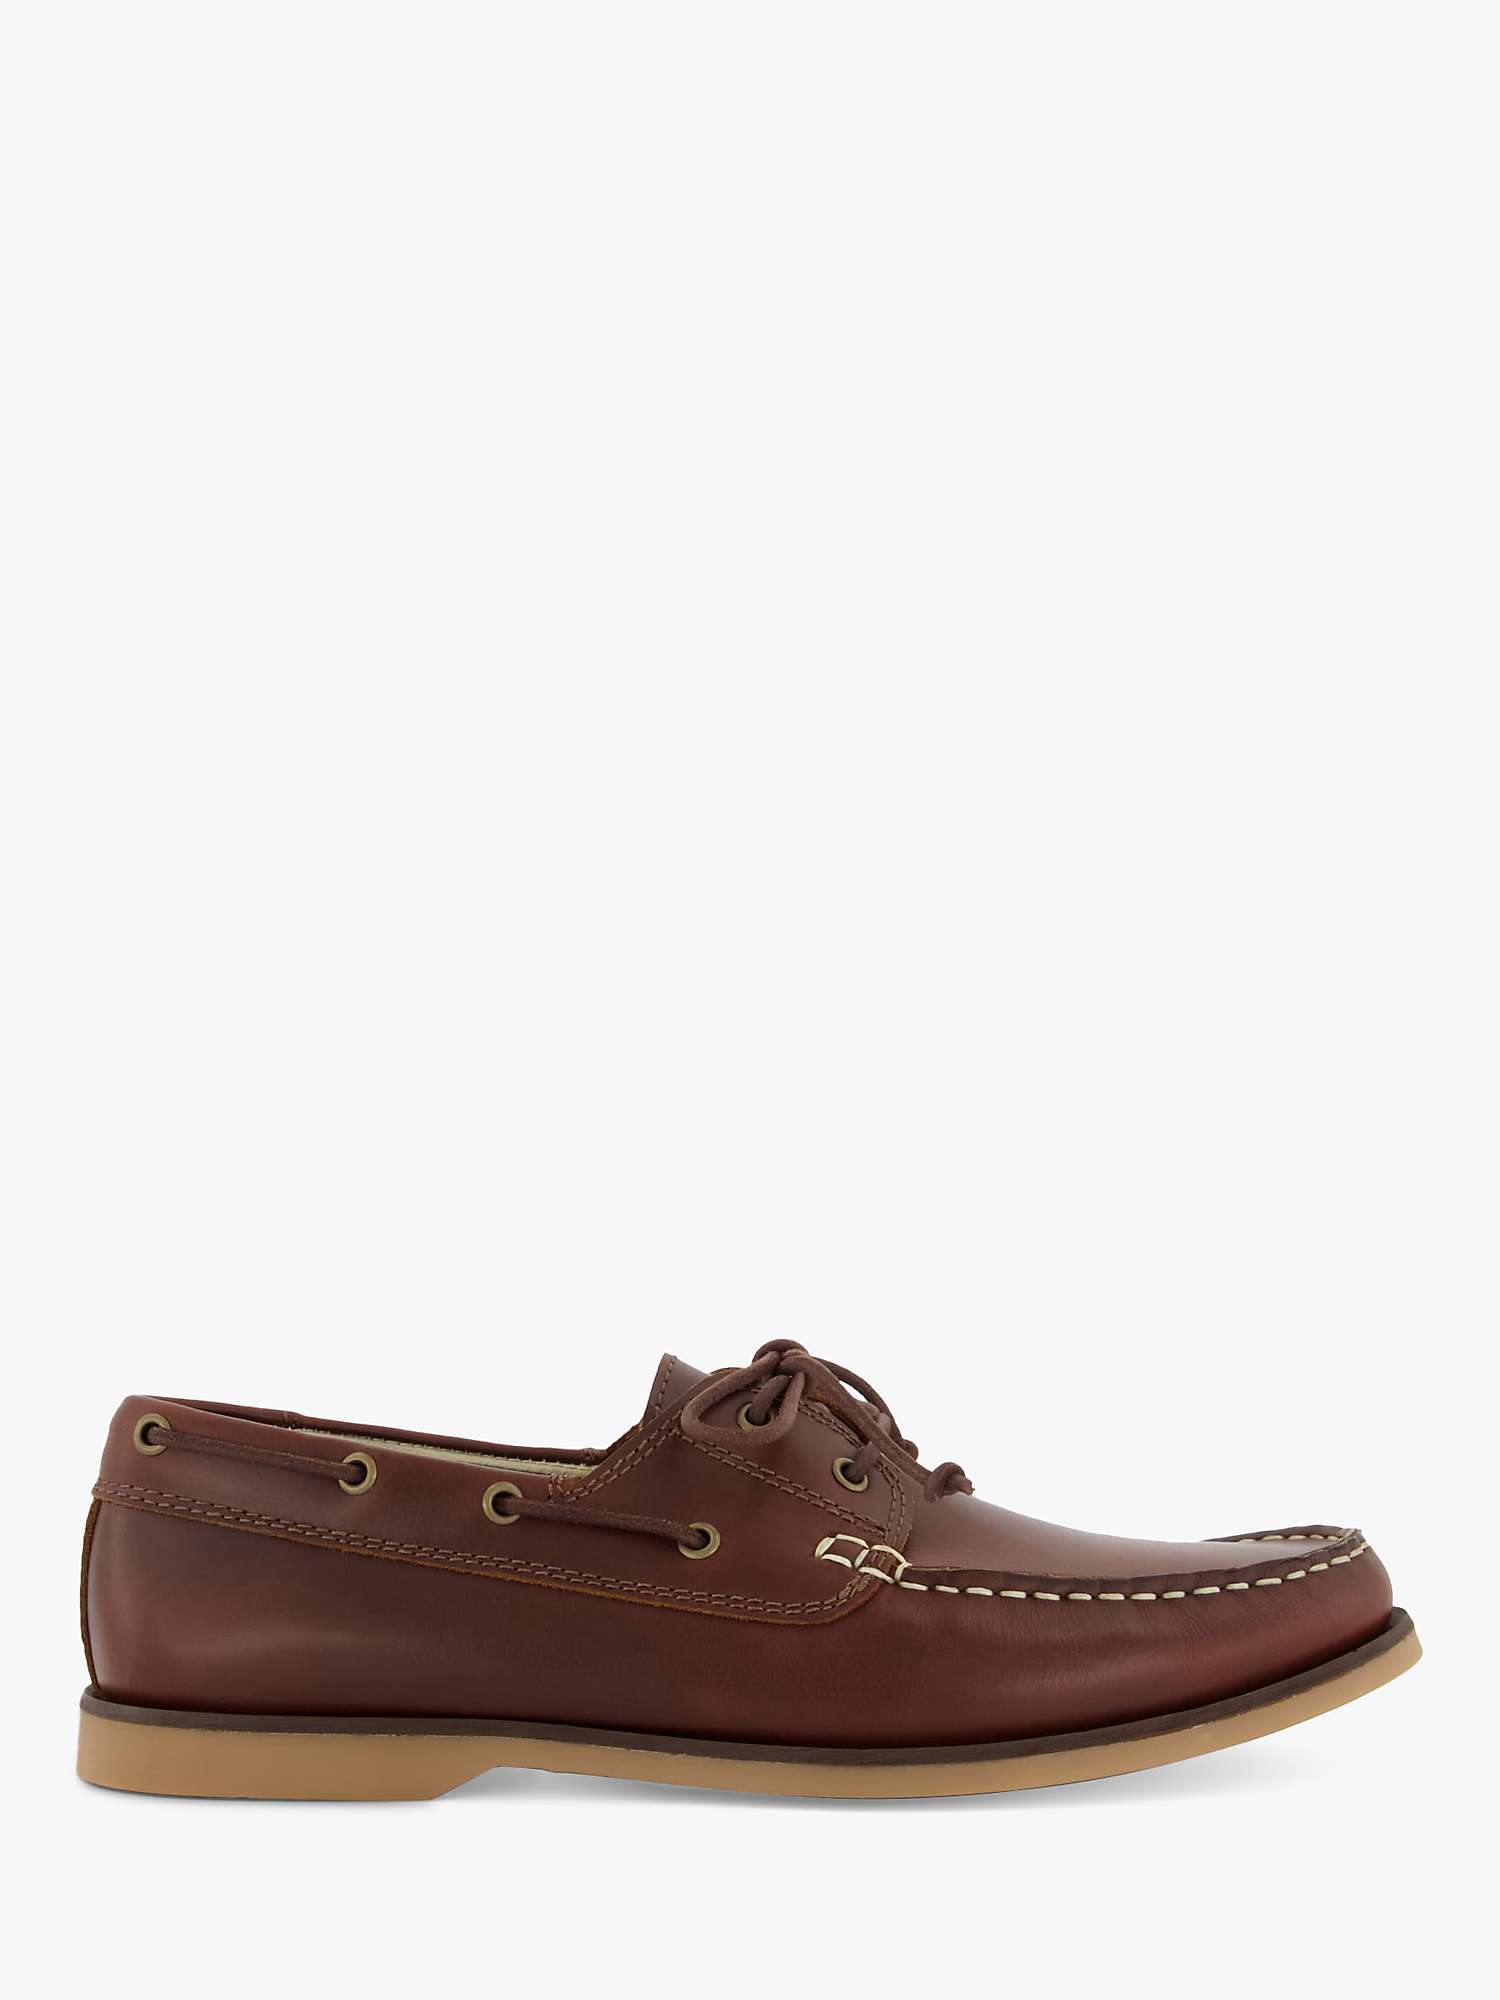 Buy Dune Blusey Leather Casual Deck Shoes Online at johnlewis.com